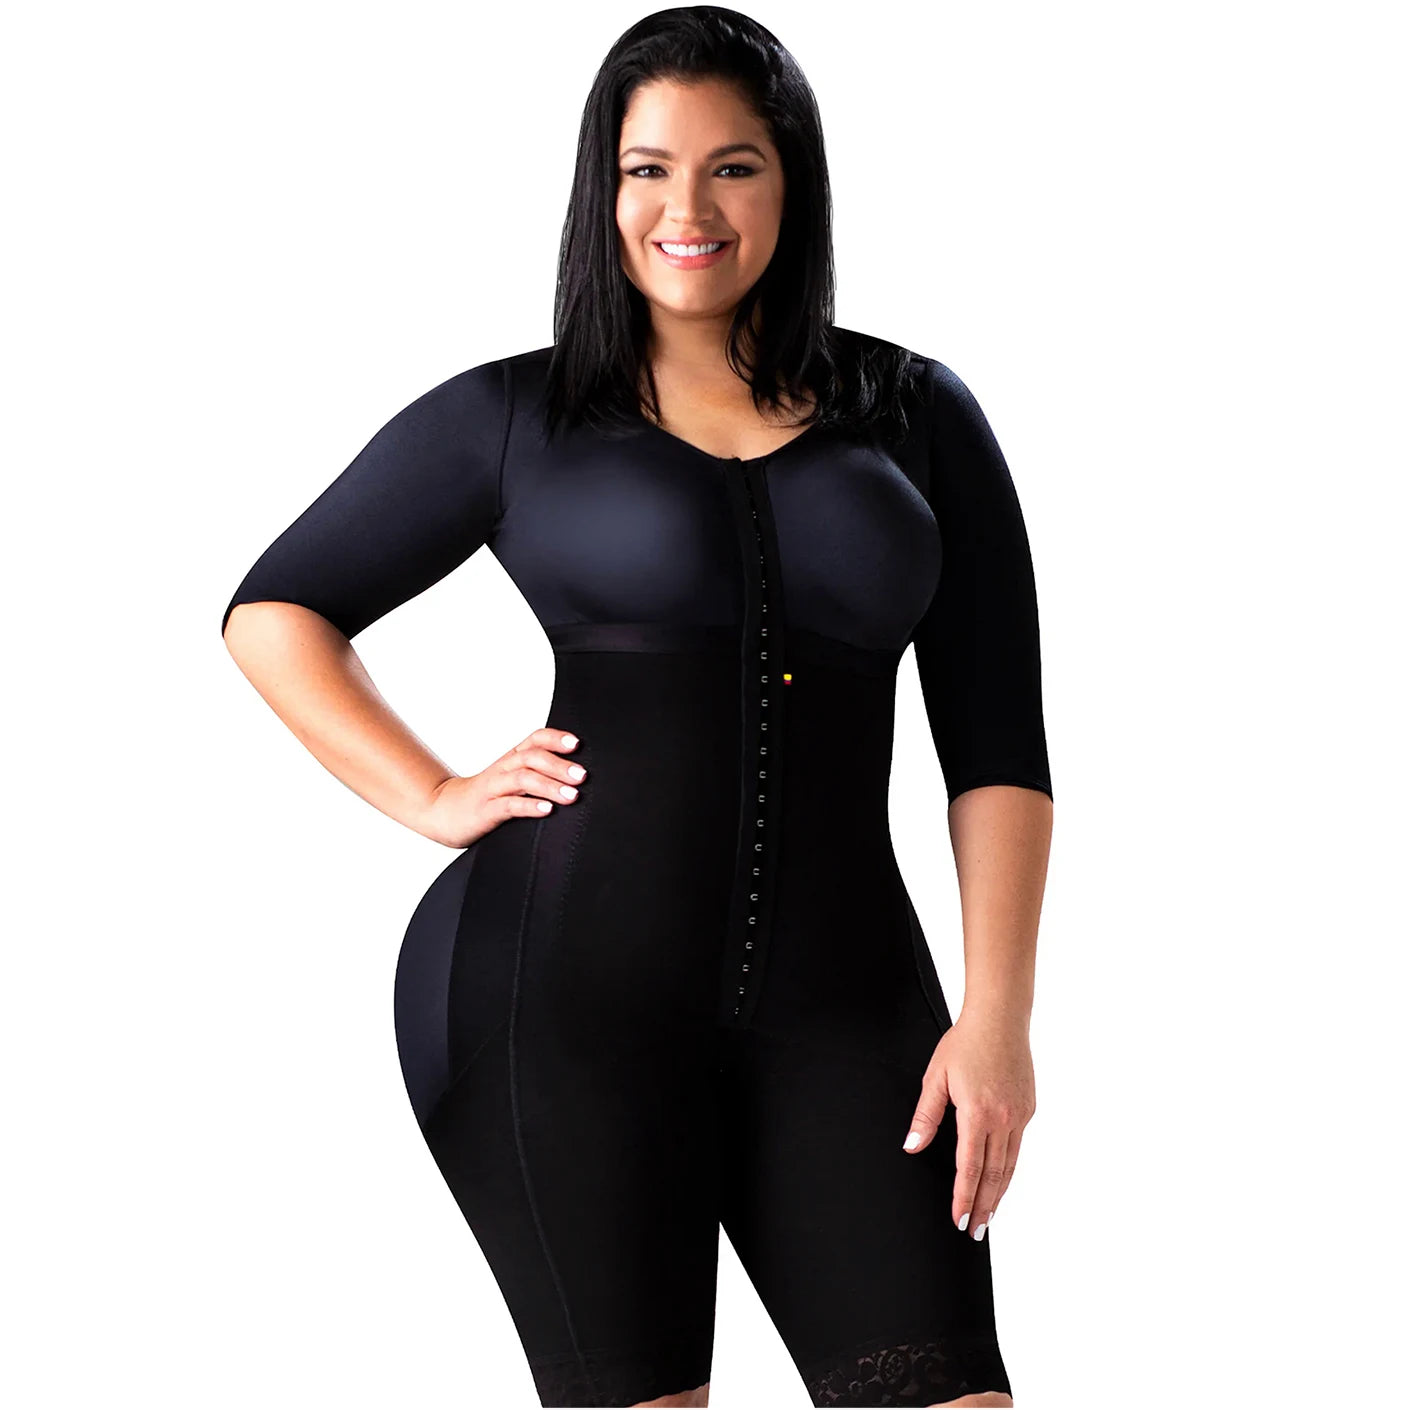 Colombian Womens Full Body Big Shaper With High Compression, Long